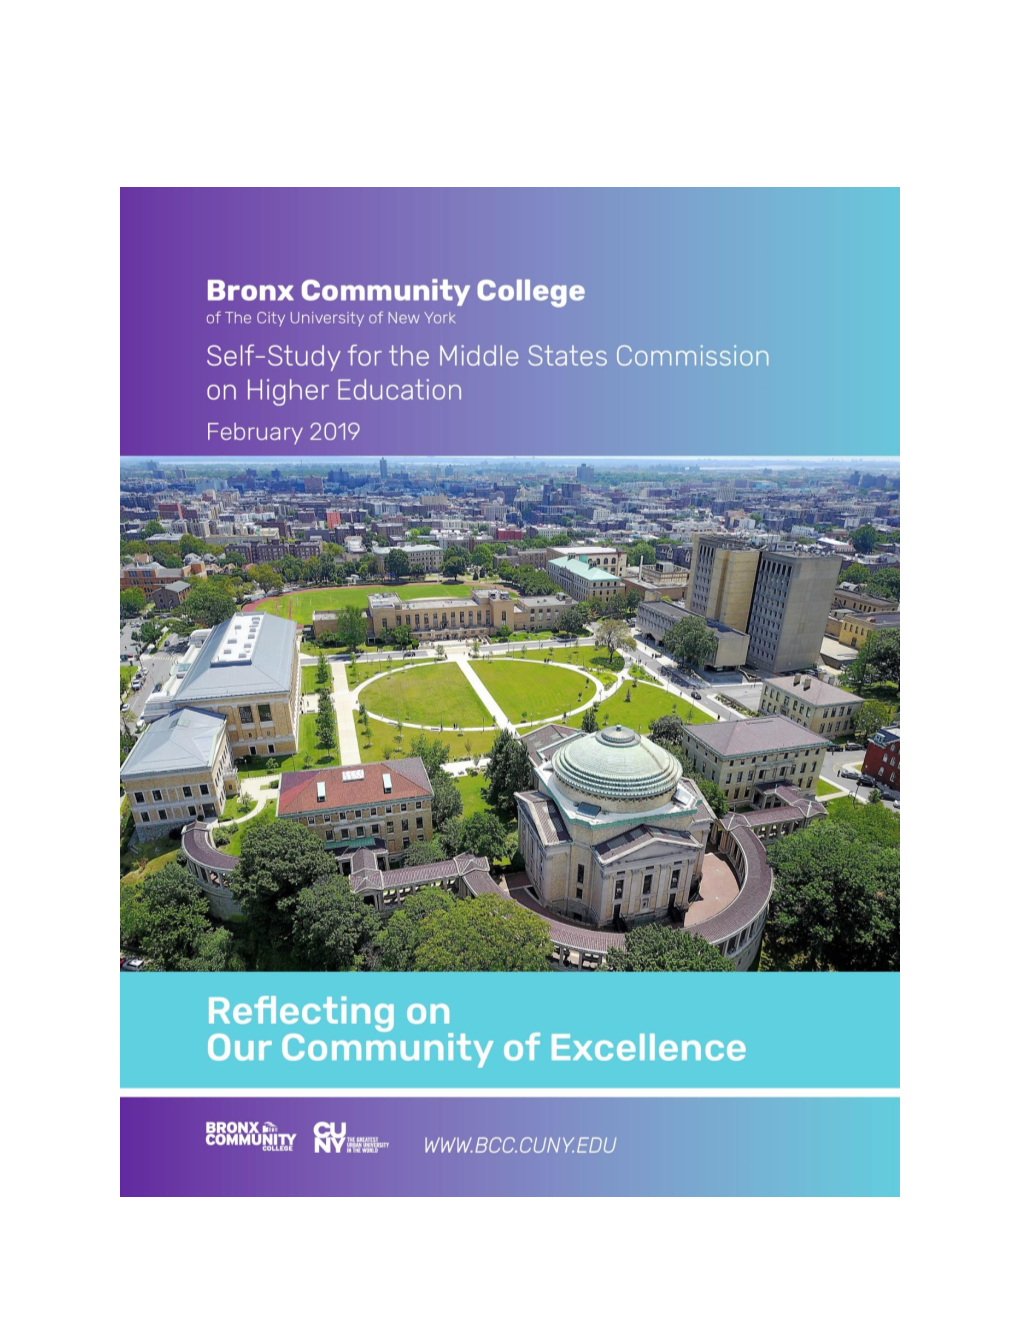 Middle States Self-Study Process Has Offered an Opportunity for the Campus Community to Examine the College’S Progress Over the Past Decade